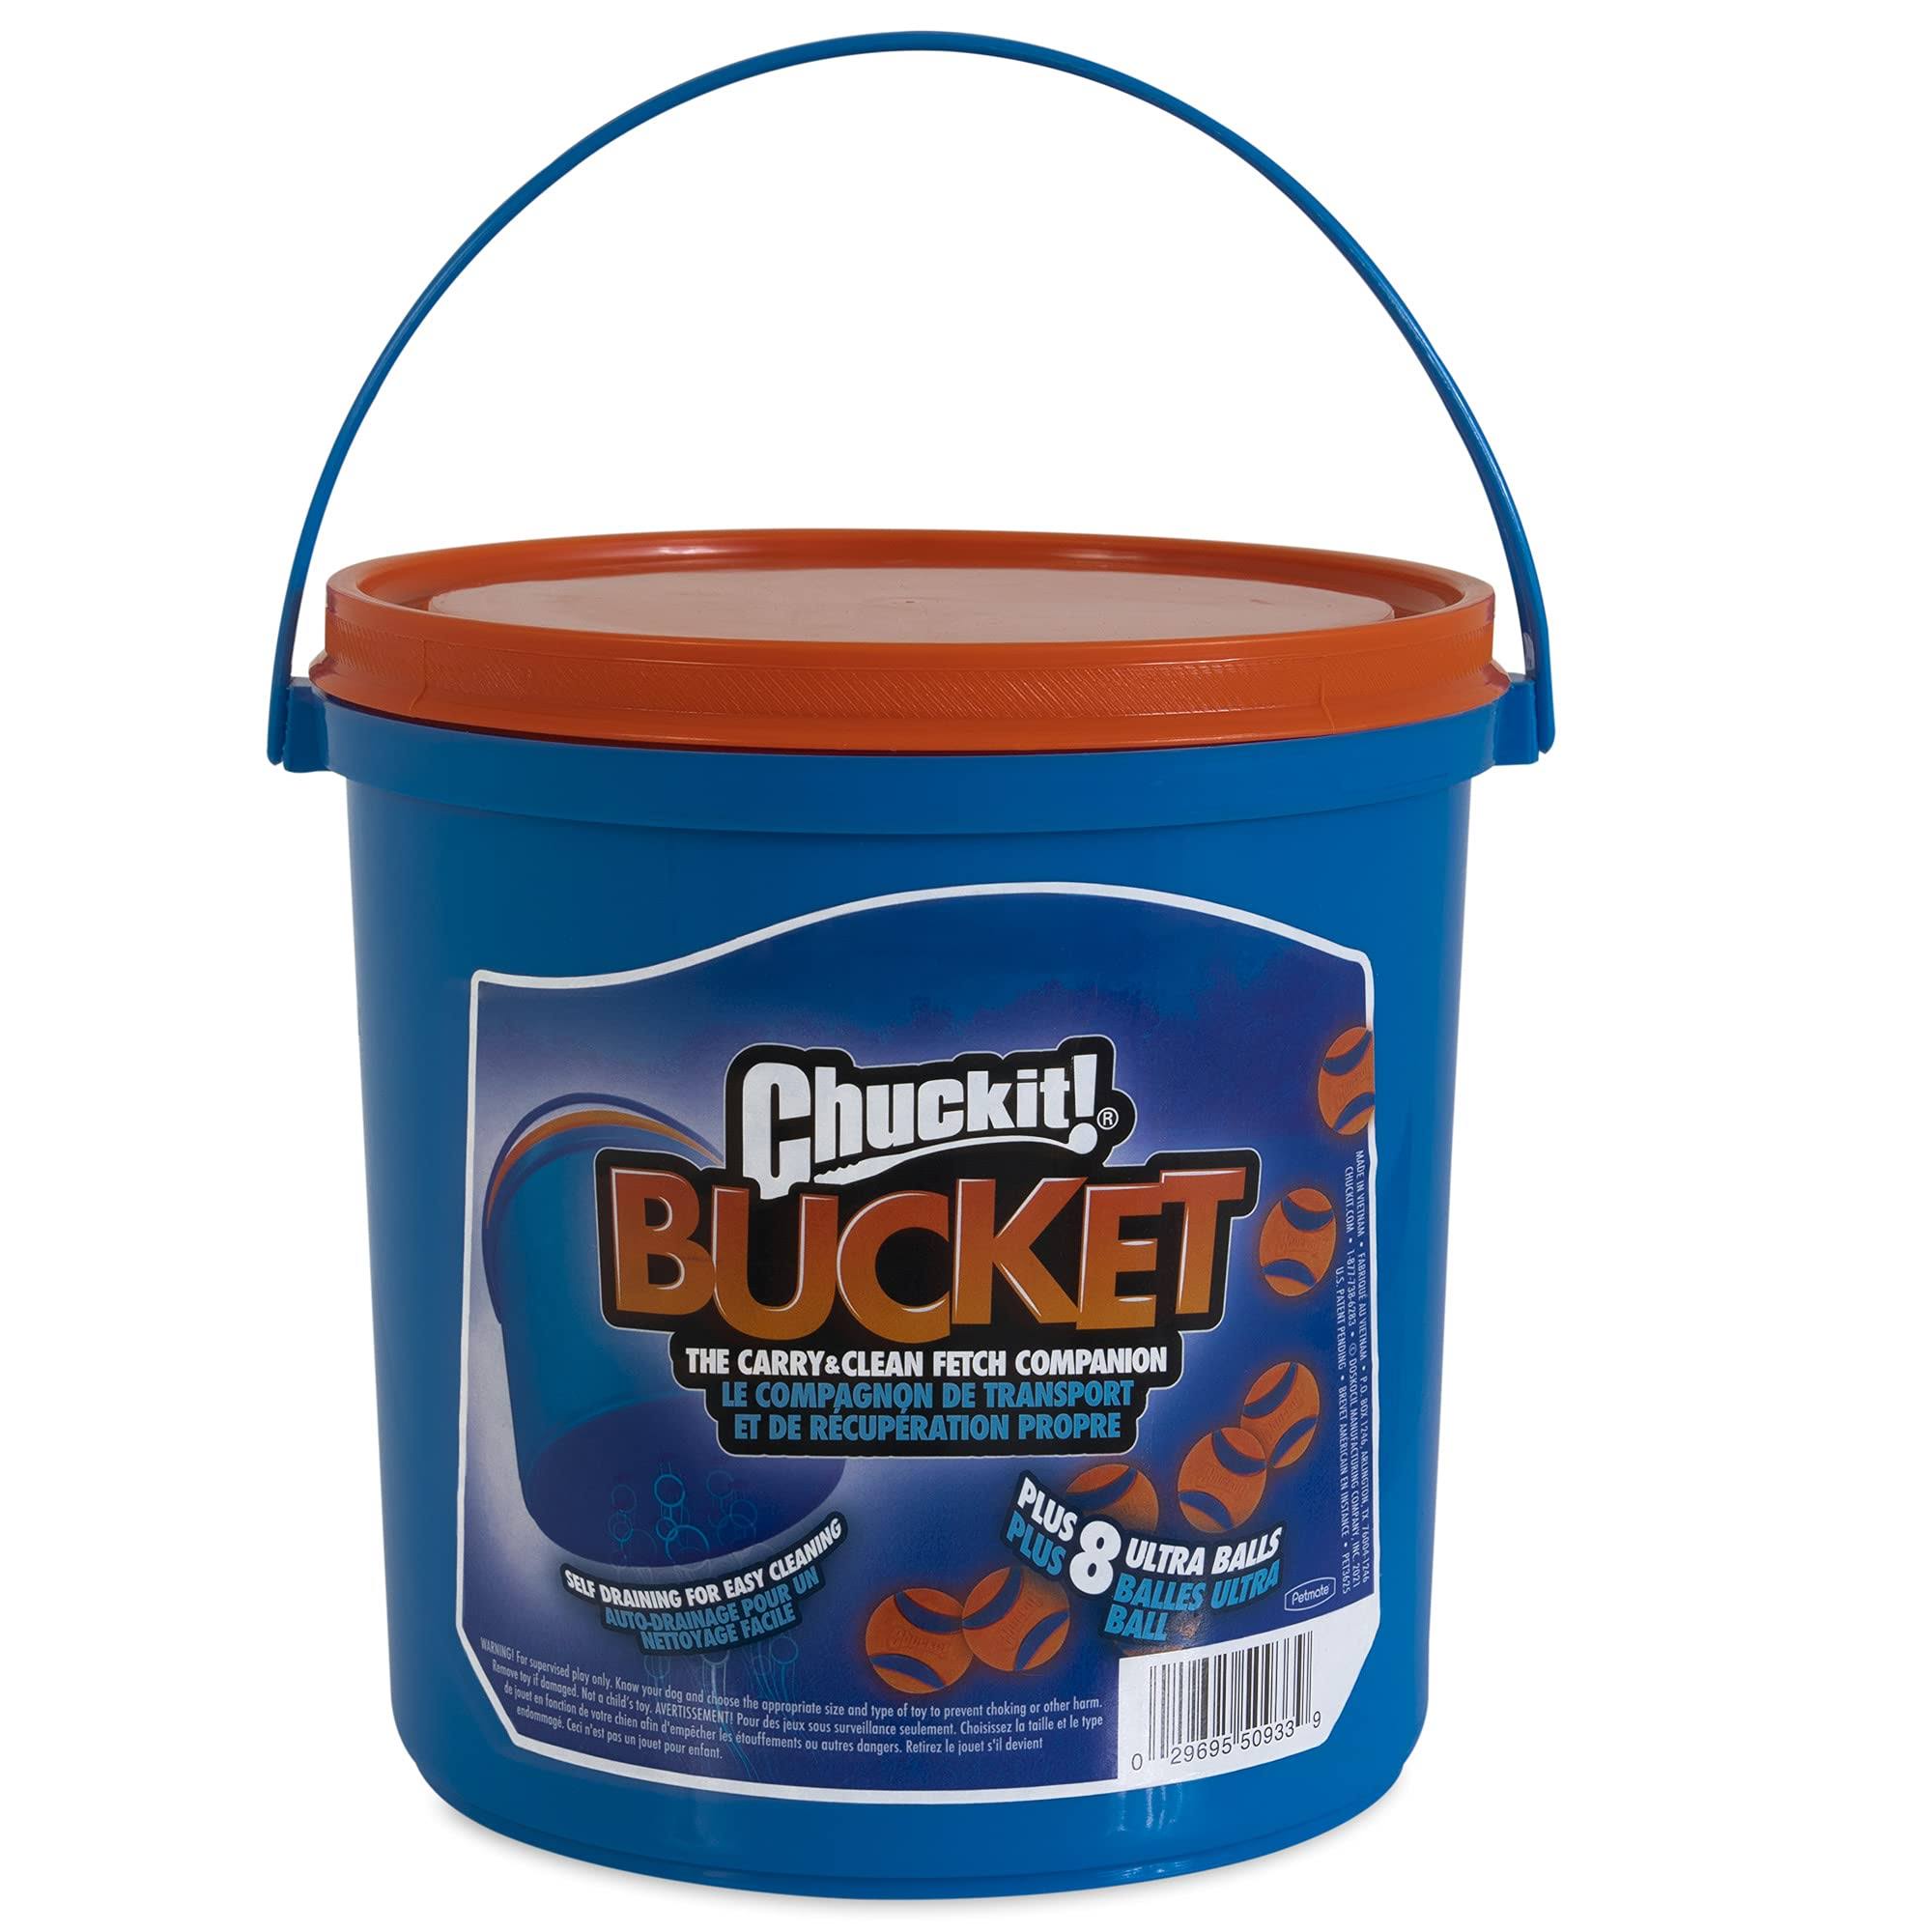 Chuckit Bucket with balls 8 pieces